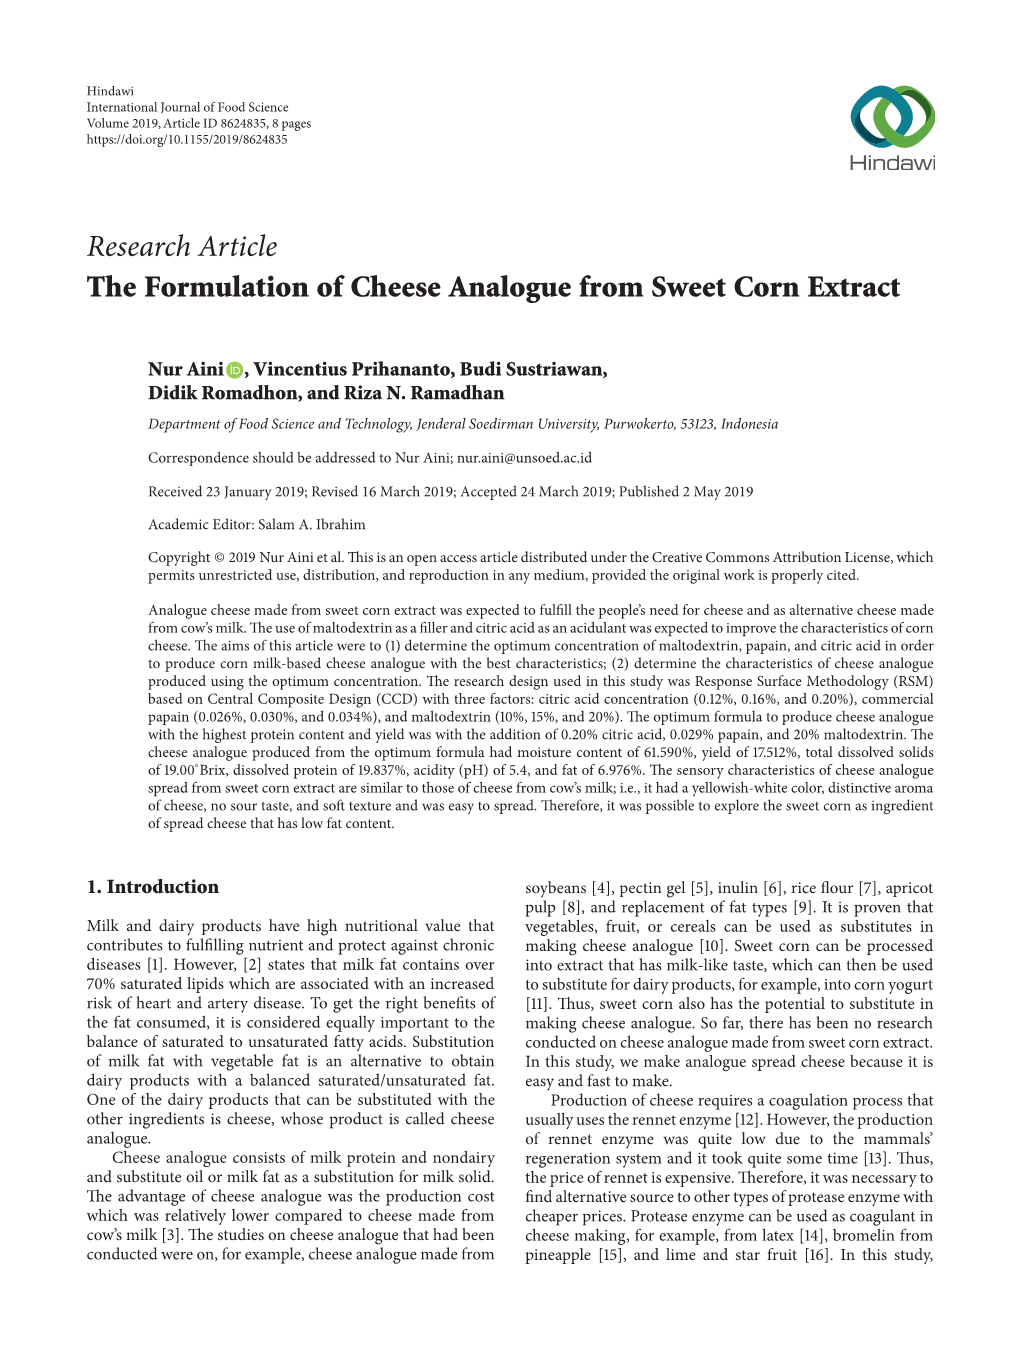 The Formulation of Cheese Analogue from Sweet Corn Extract